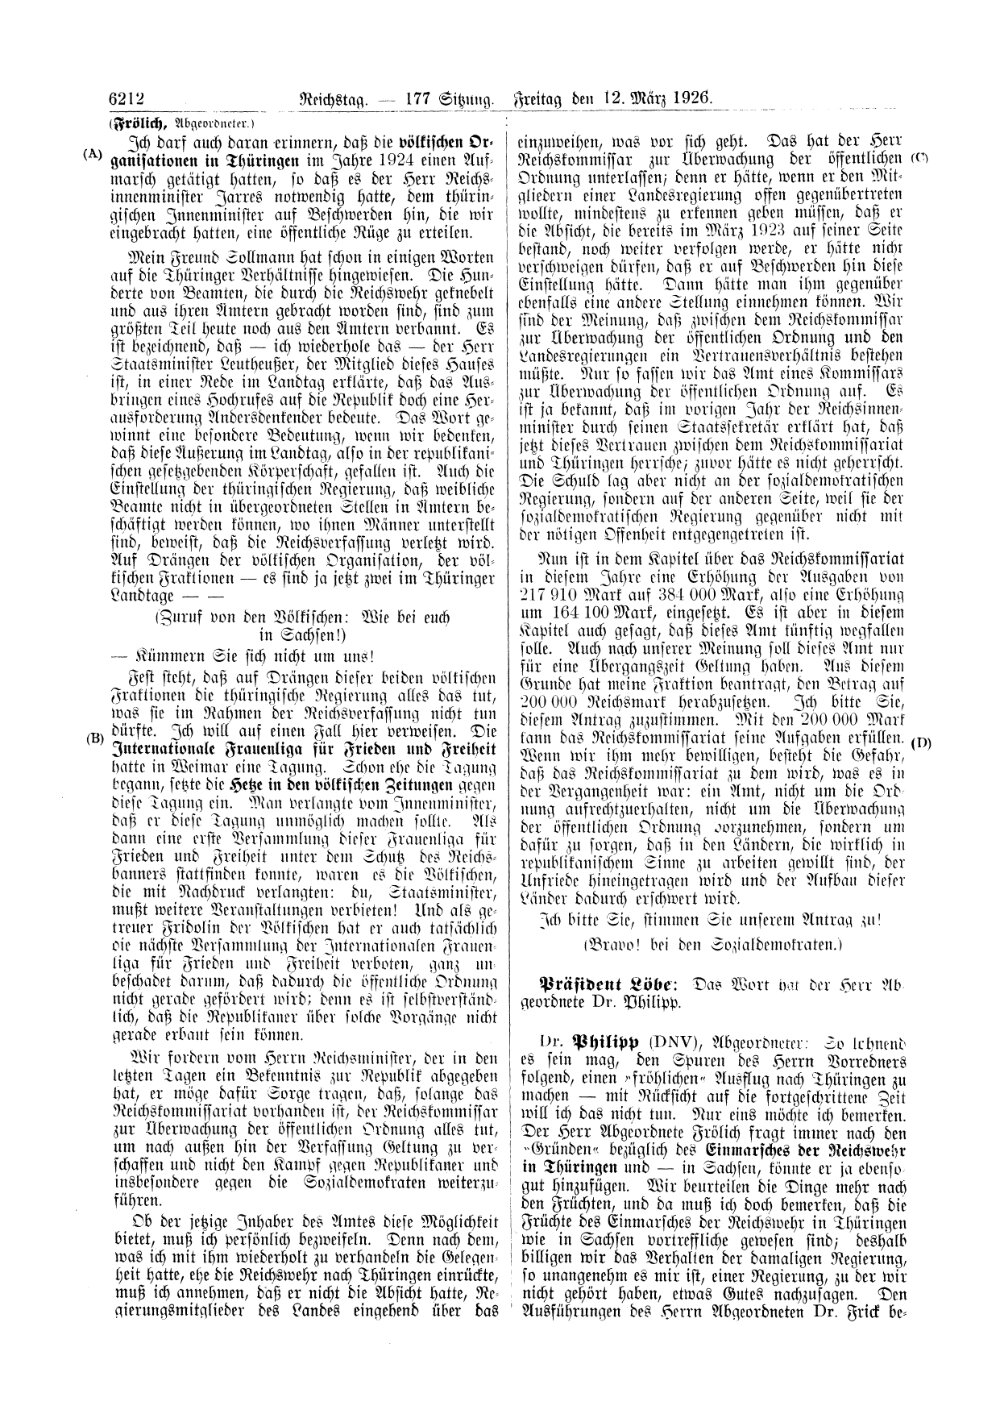 Scan of page 6212